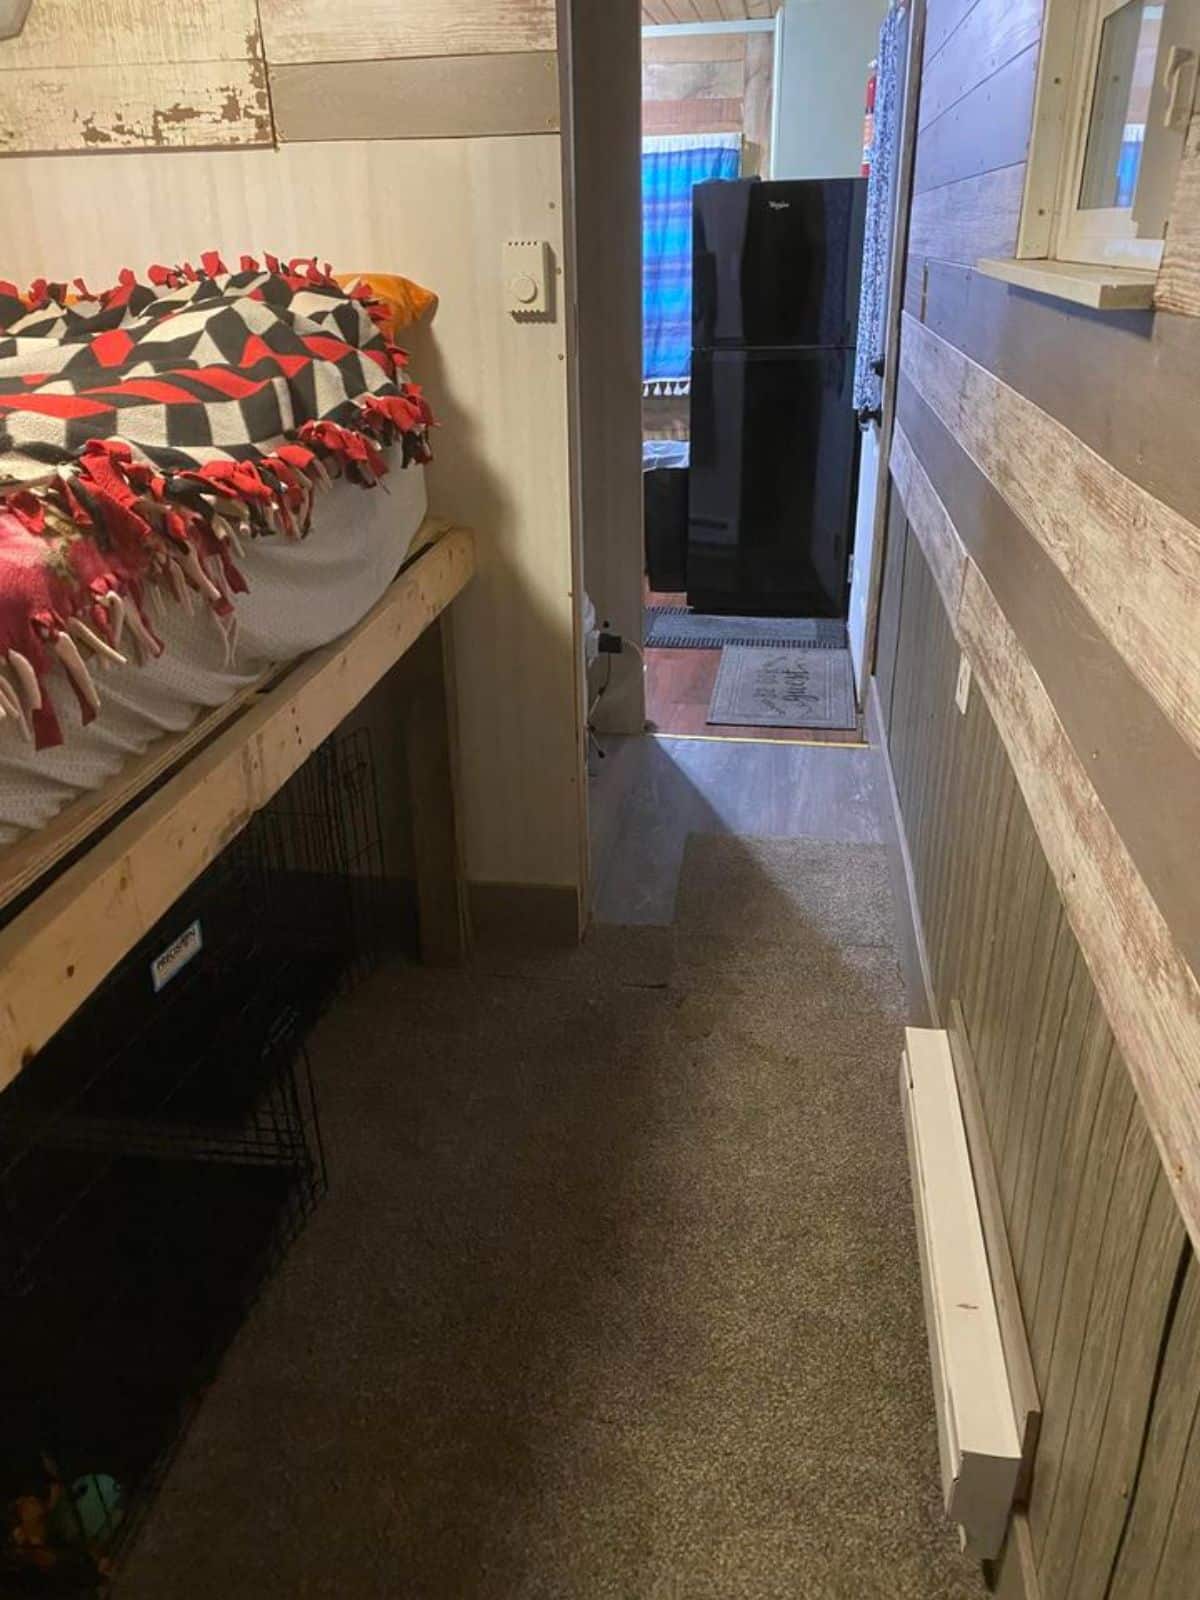 walk away space between bedroom and kitchen of 20' remodeled tiny home